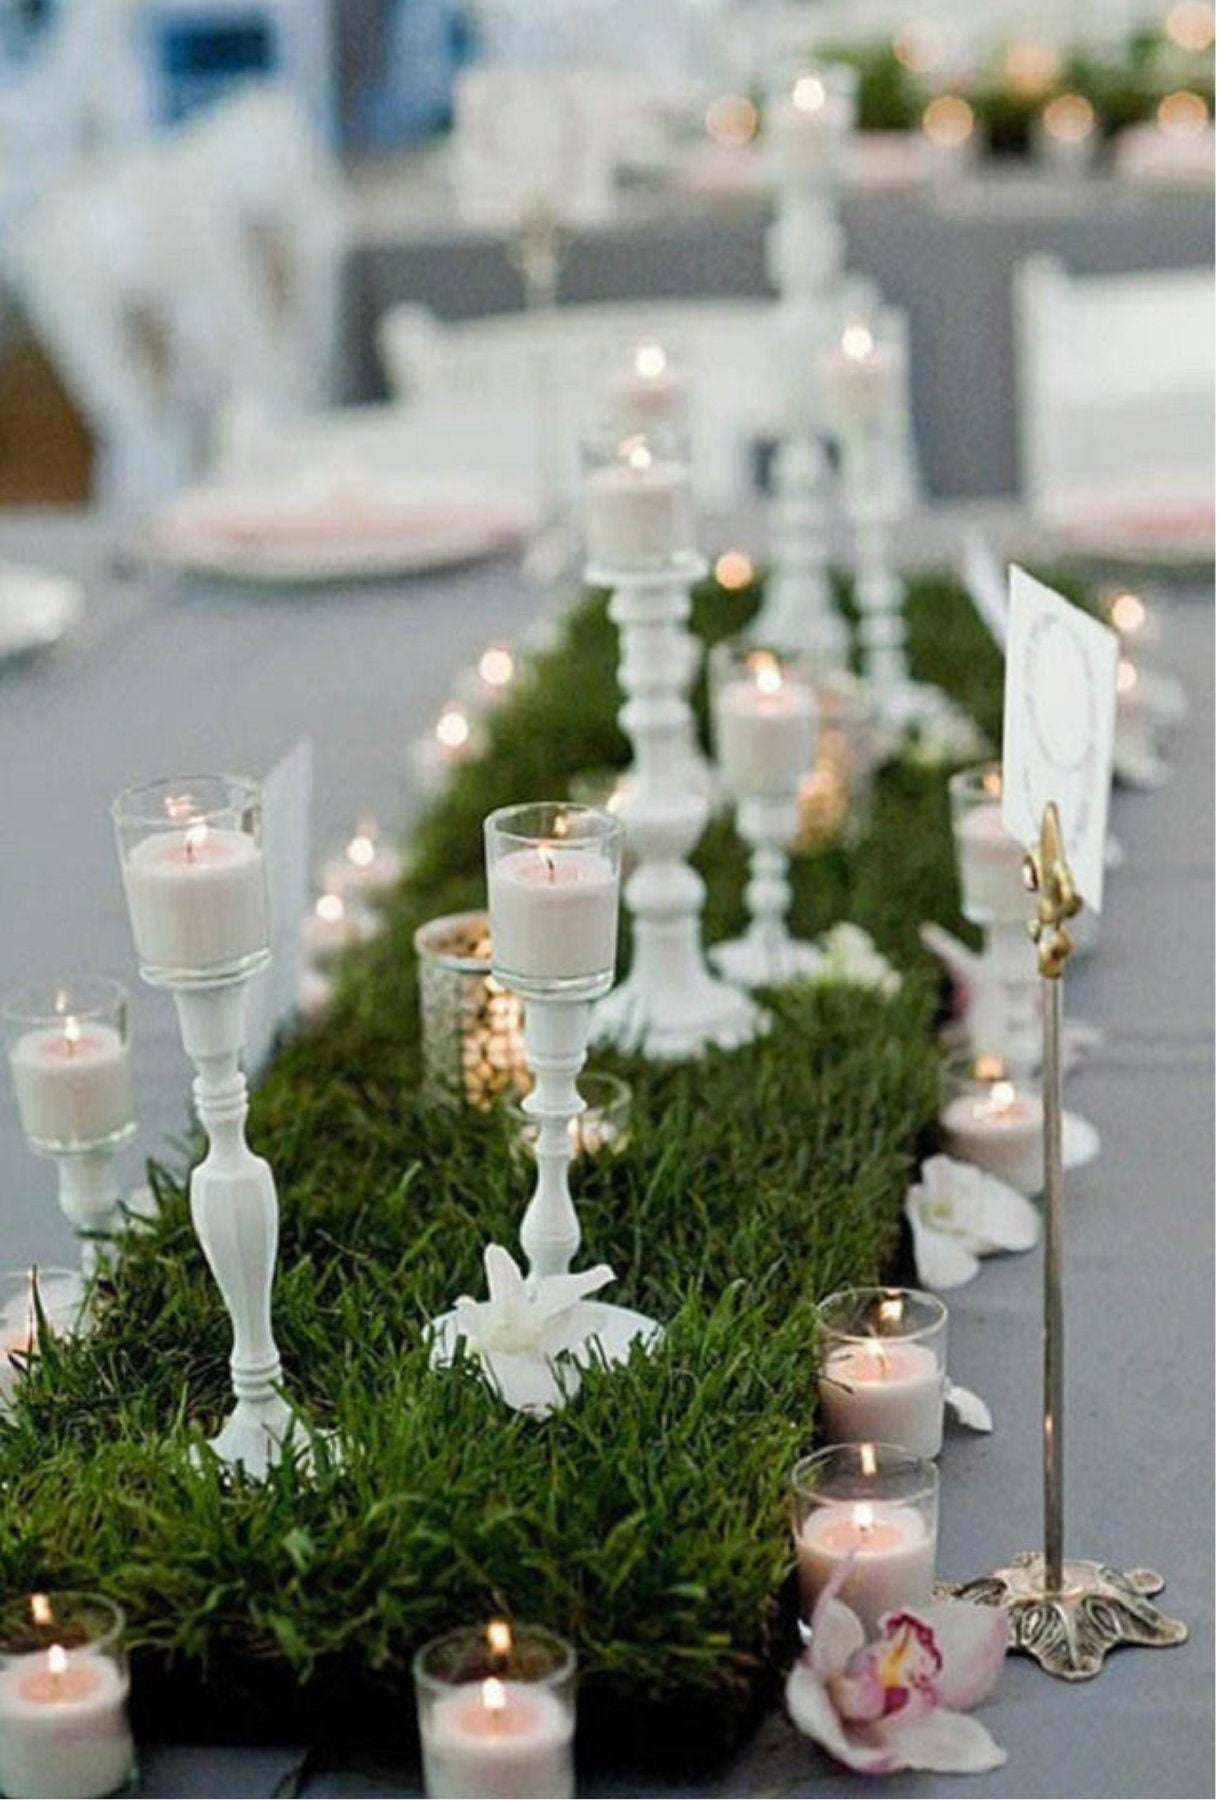 Artificial Grass Table Runner Decorations For Party Wedding Birthday 12 X